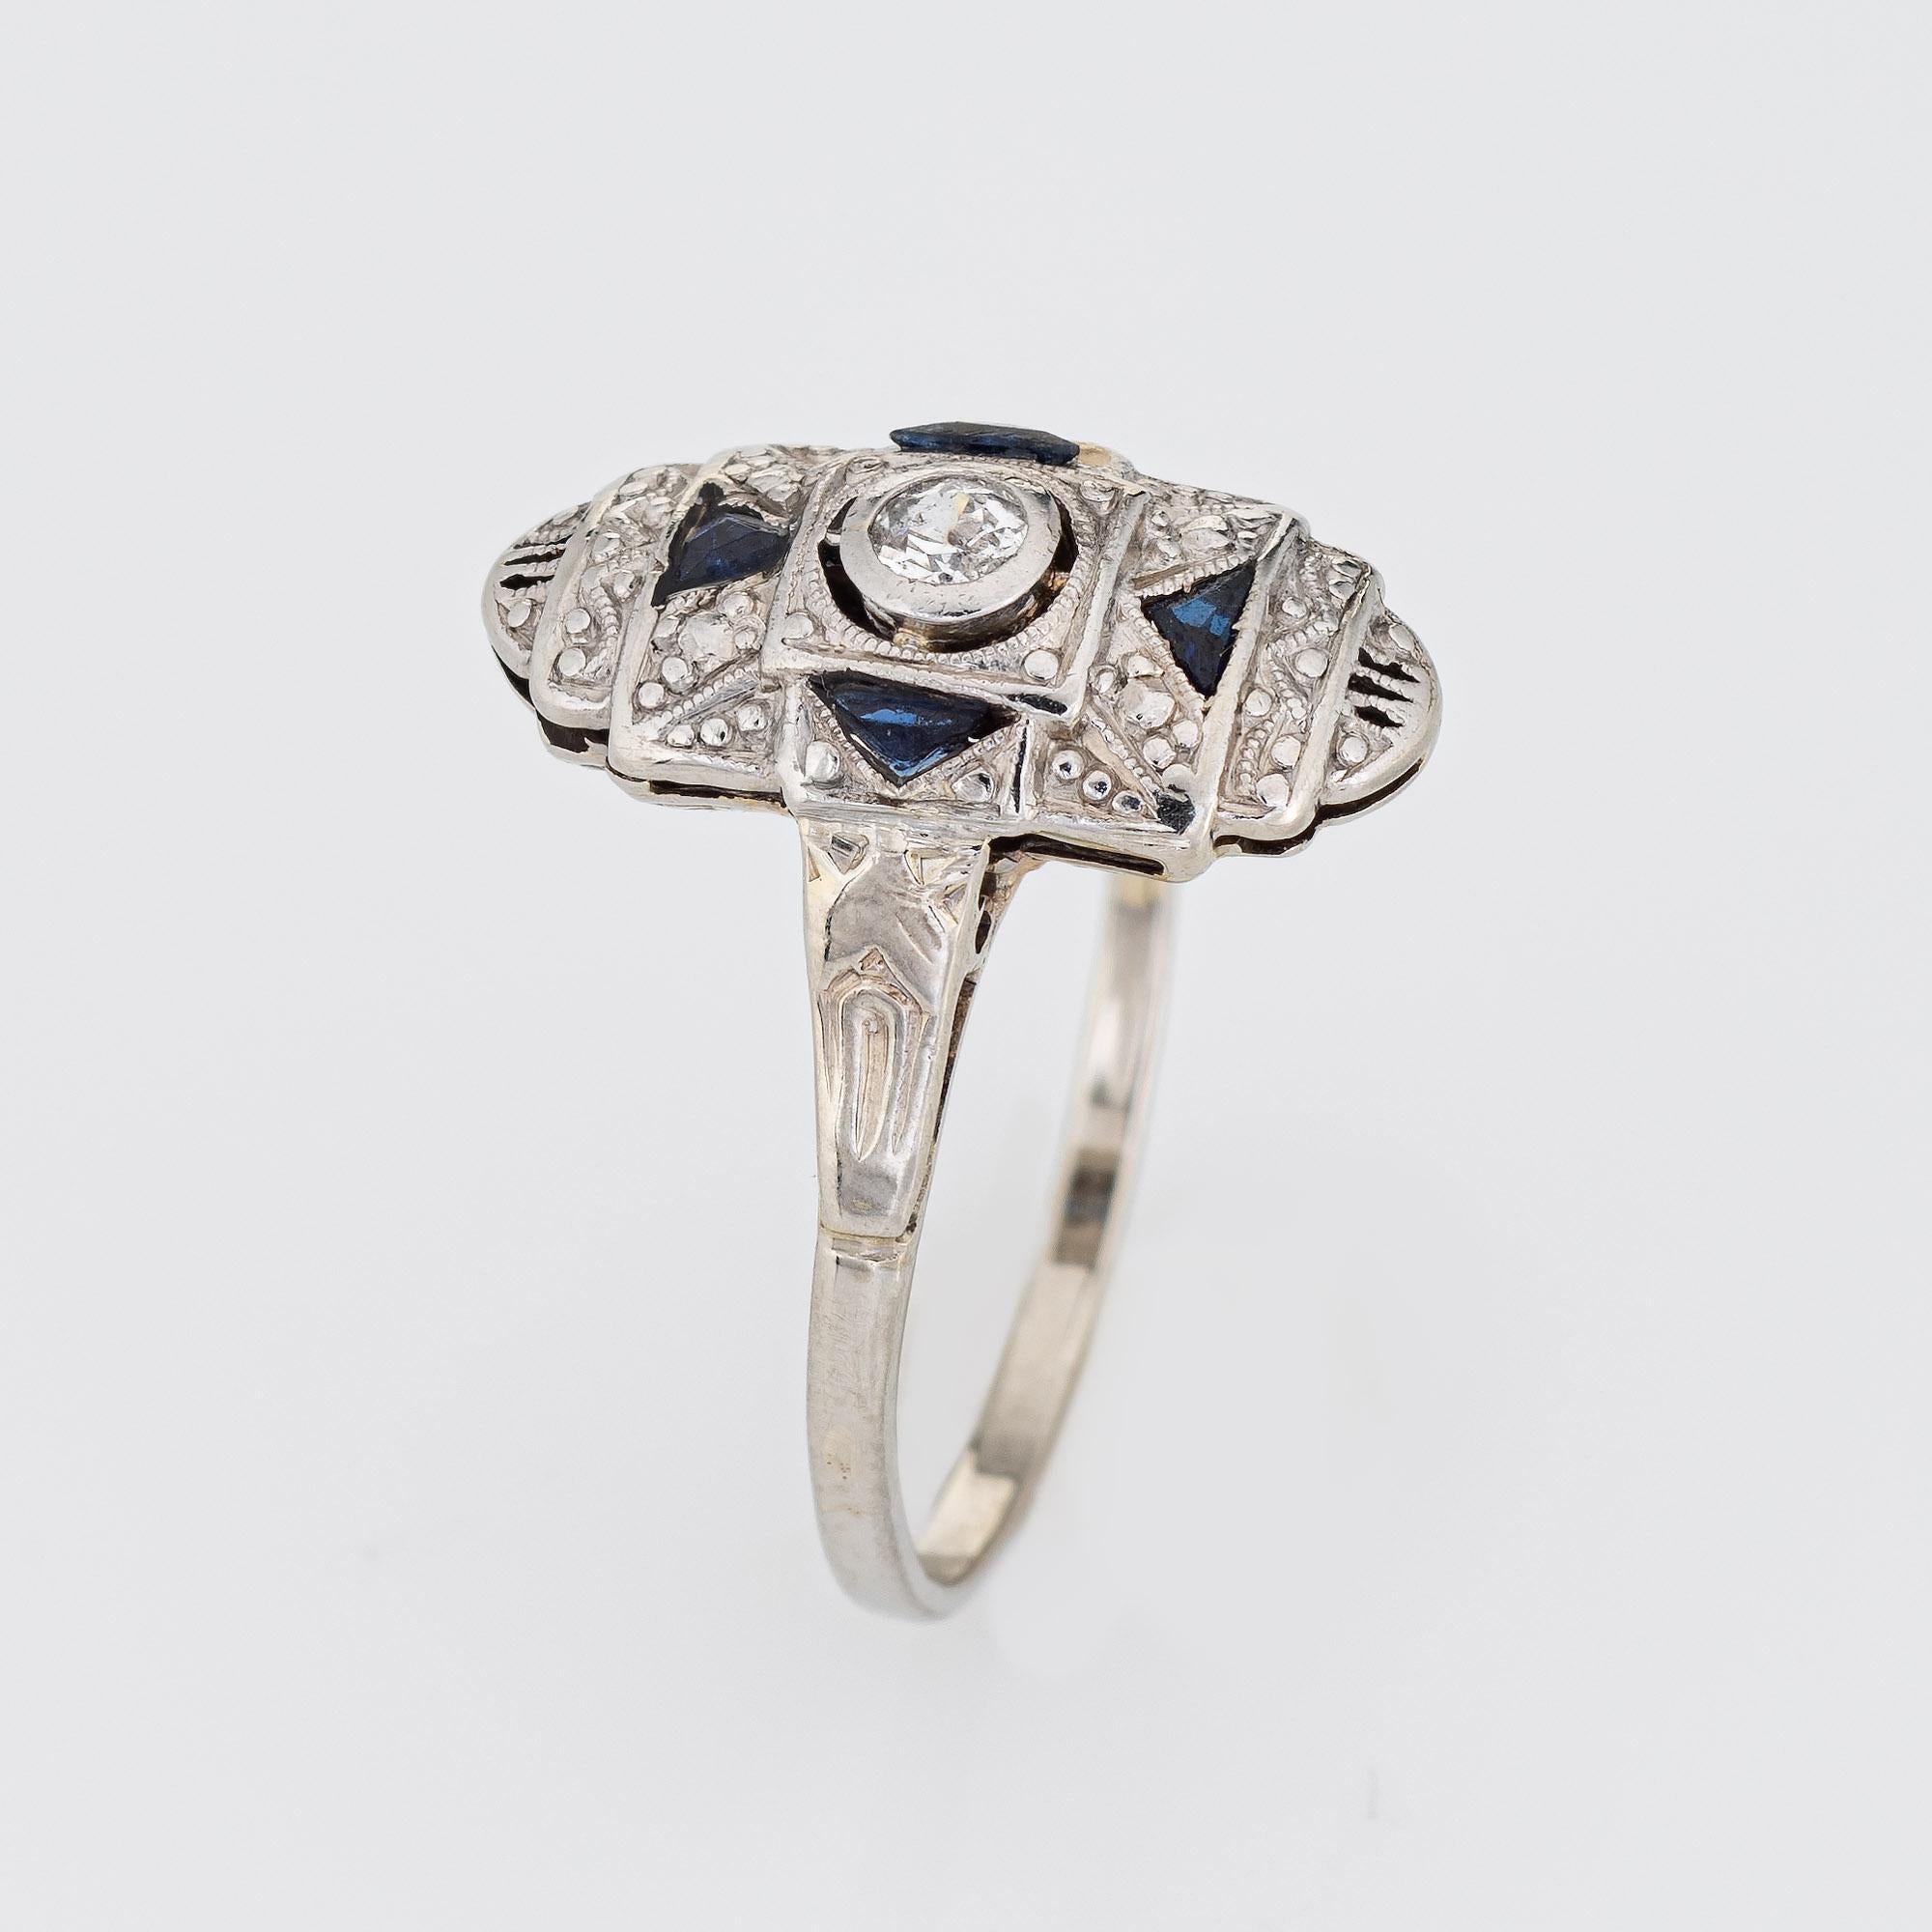 Finely detailed vintage Art Deco diamond & sapphire ring (circa 1920s to 1930s) crafted in 14k white gold. 

One estimated 0.10 carat old European cut diamonds is estimated at J-K color and I1 clarity. Four sapphires (lab) total an estimated 0.15